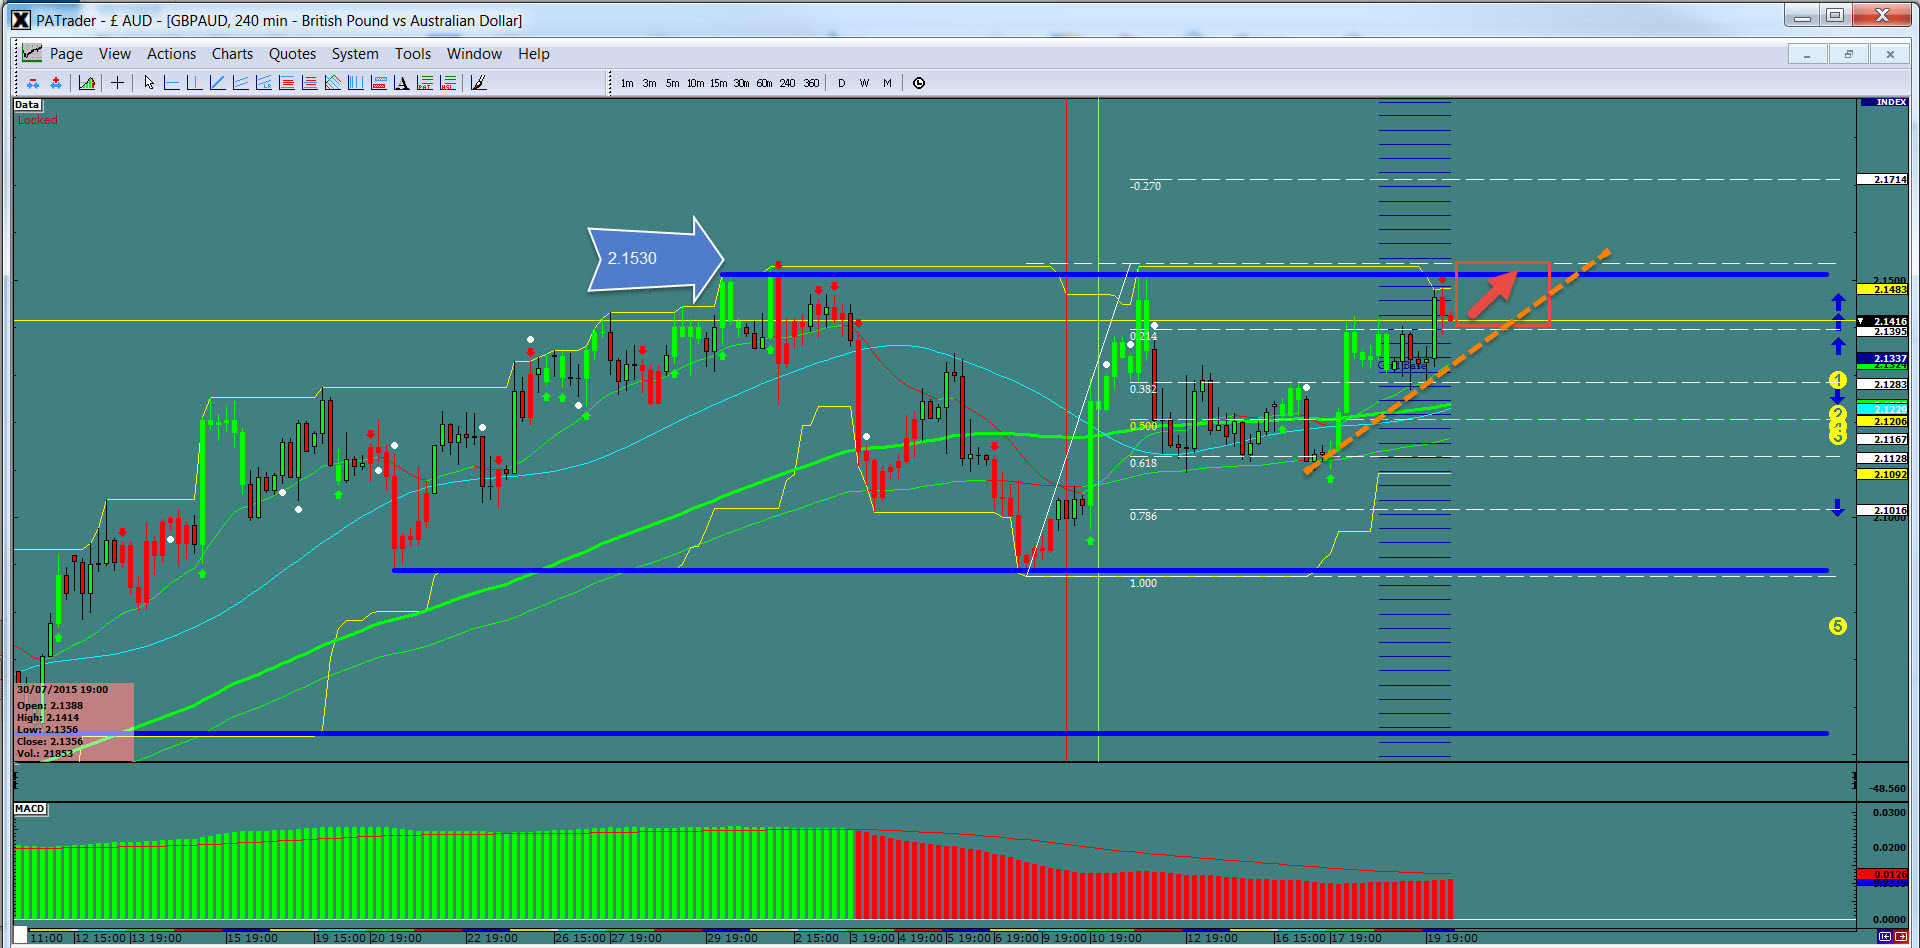 GBP/AUD 240-Minute Chart